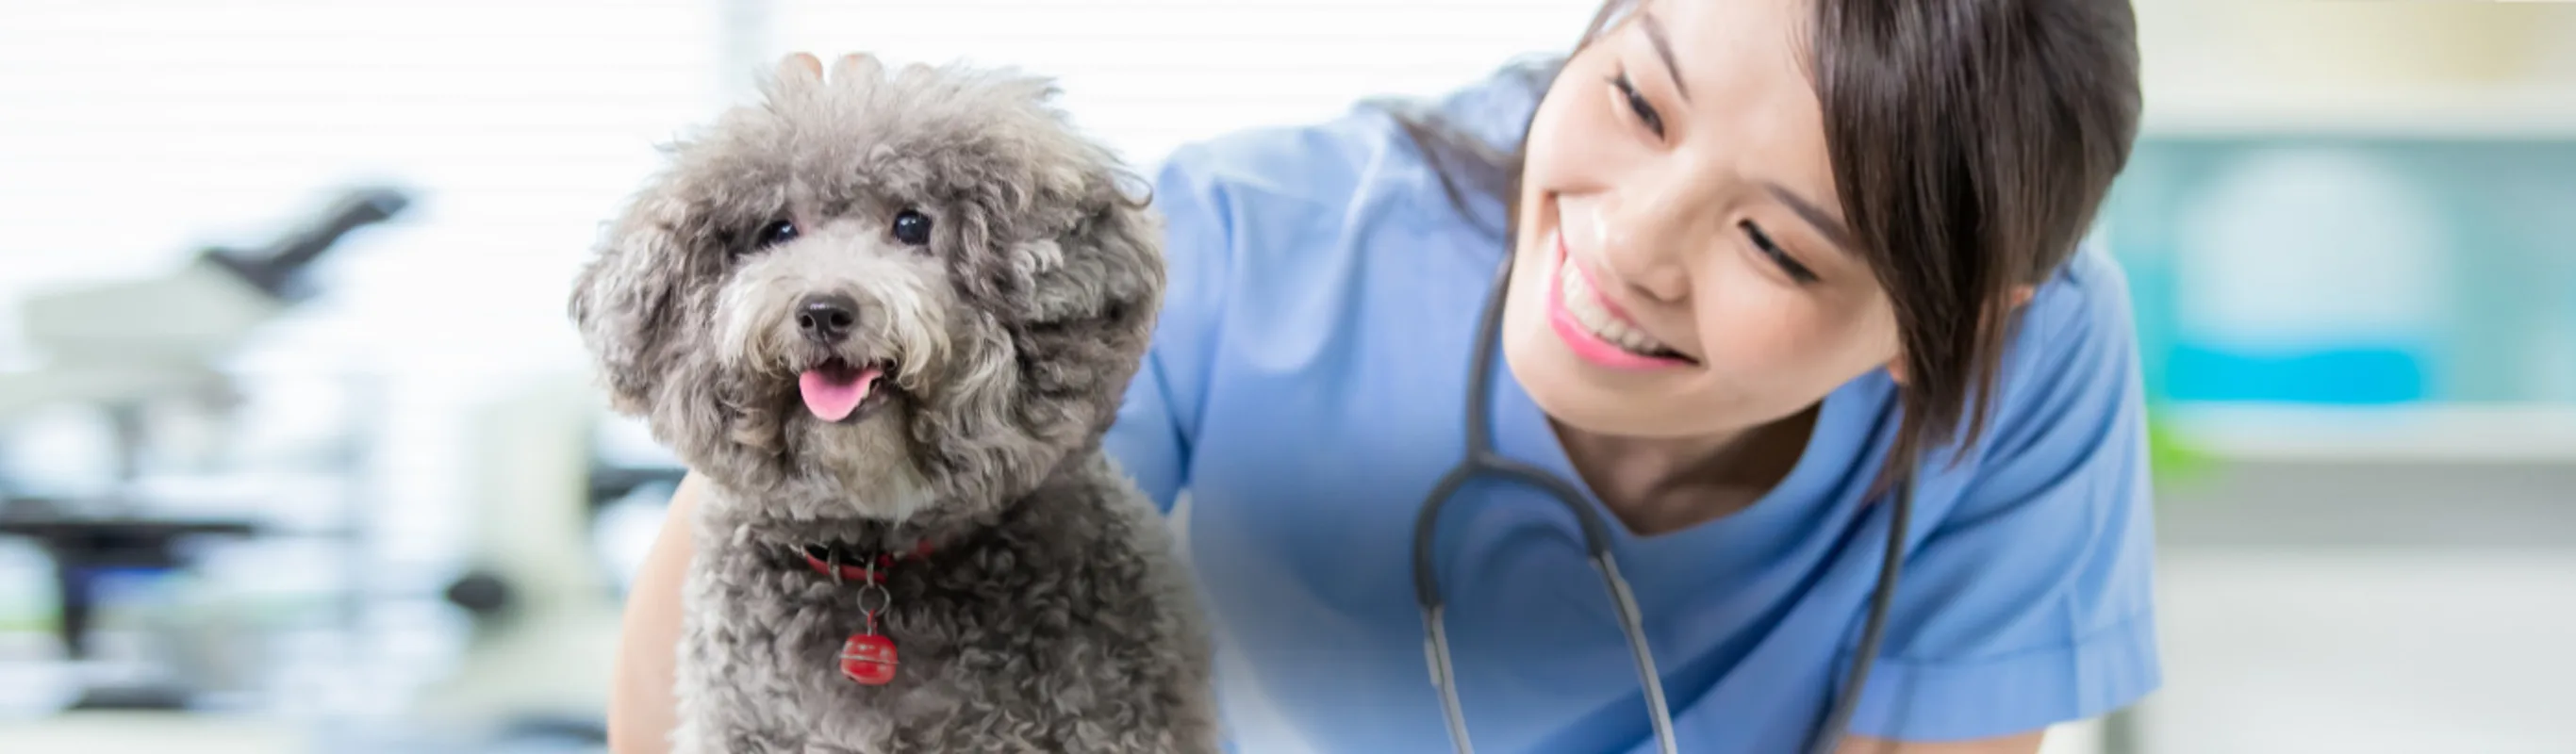 Veterinary health professional wearing a stethoscope with small gray dog